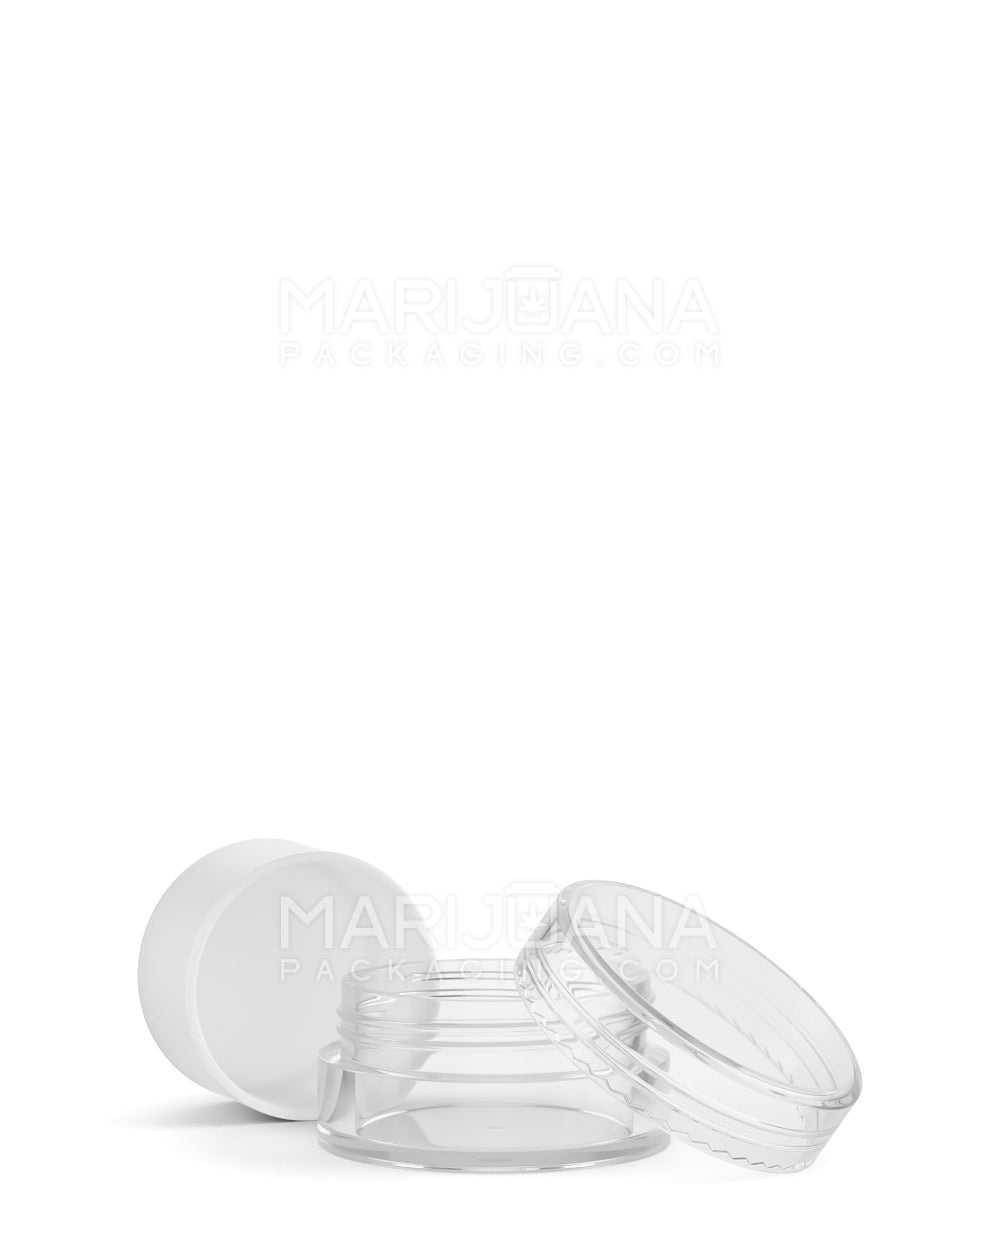 Clear Concentrate Containers w/ Screw Top Cap & White Silicone Insert | 5mL - Plastic | Sample - 4